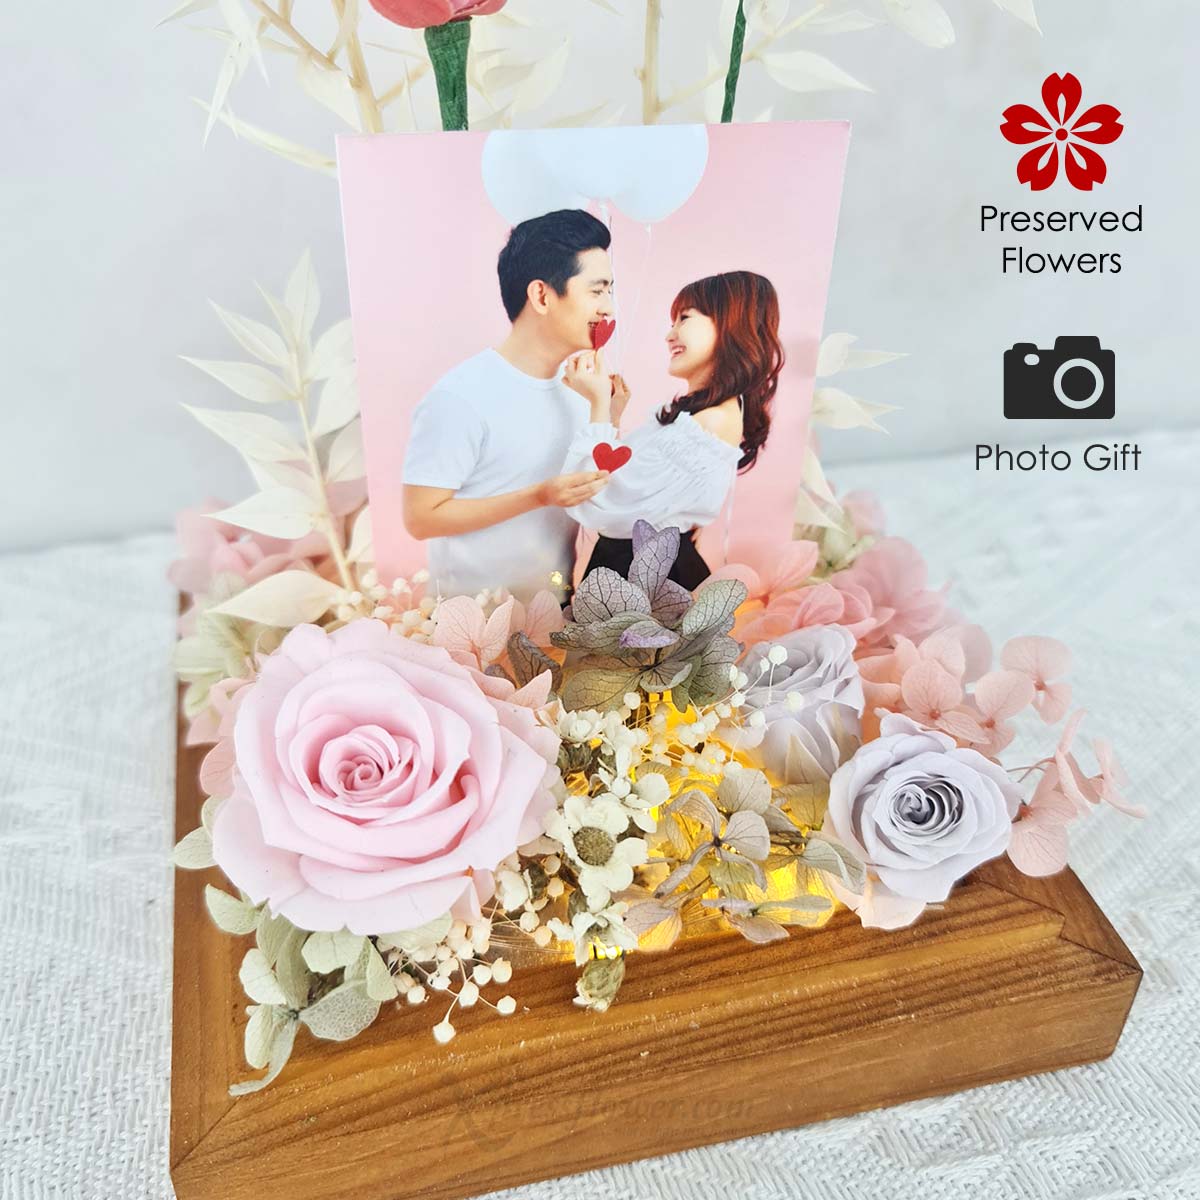 PR2304 Romance Mansion Preserved Flowers with Personalised Photo) 1D